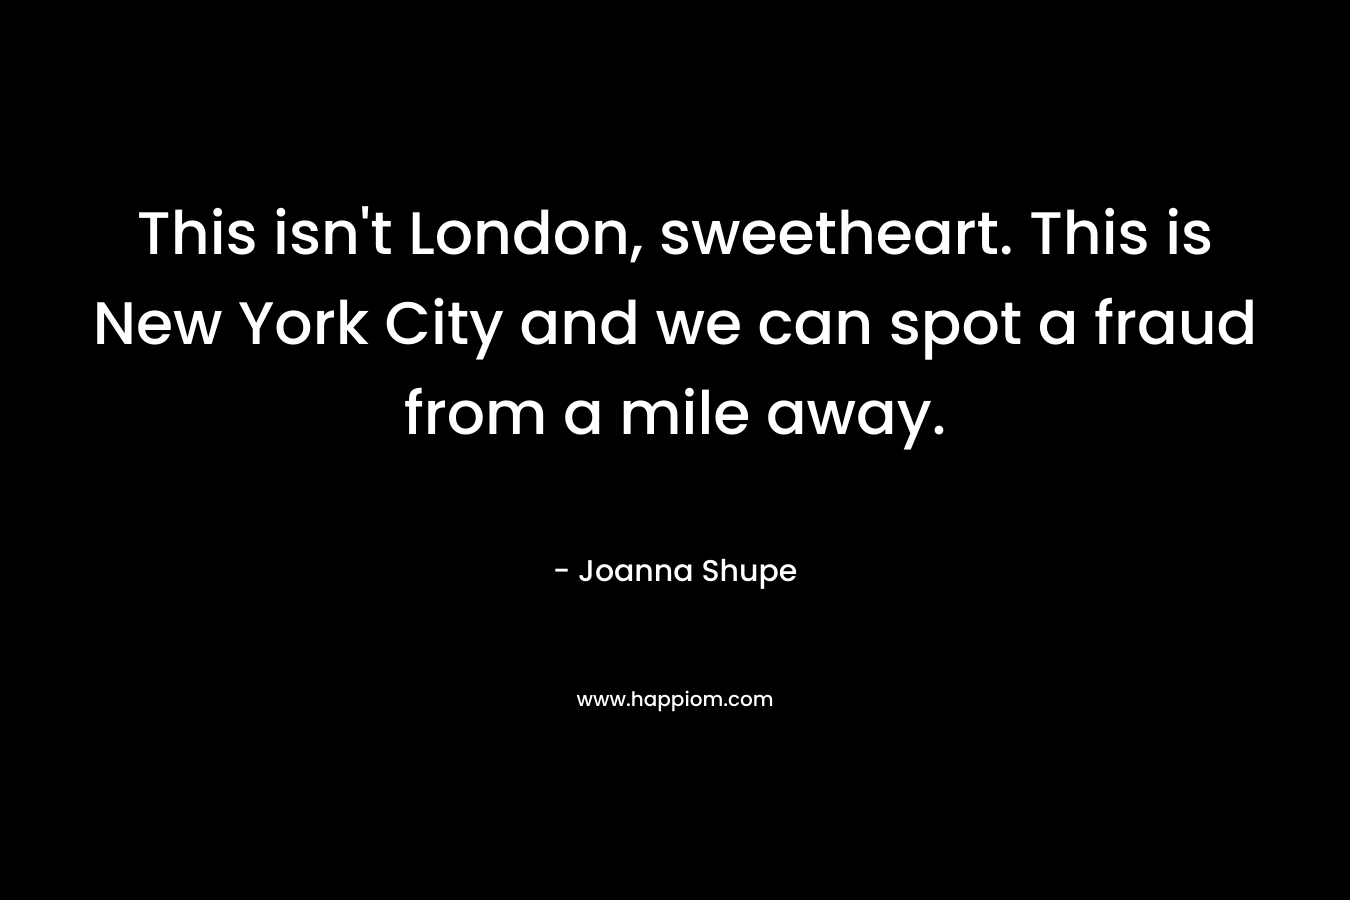 This isn't London, sweetheart. This is New York City and we can spot a fraud from a mile away.